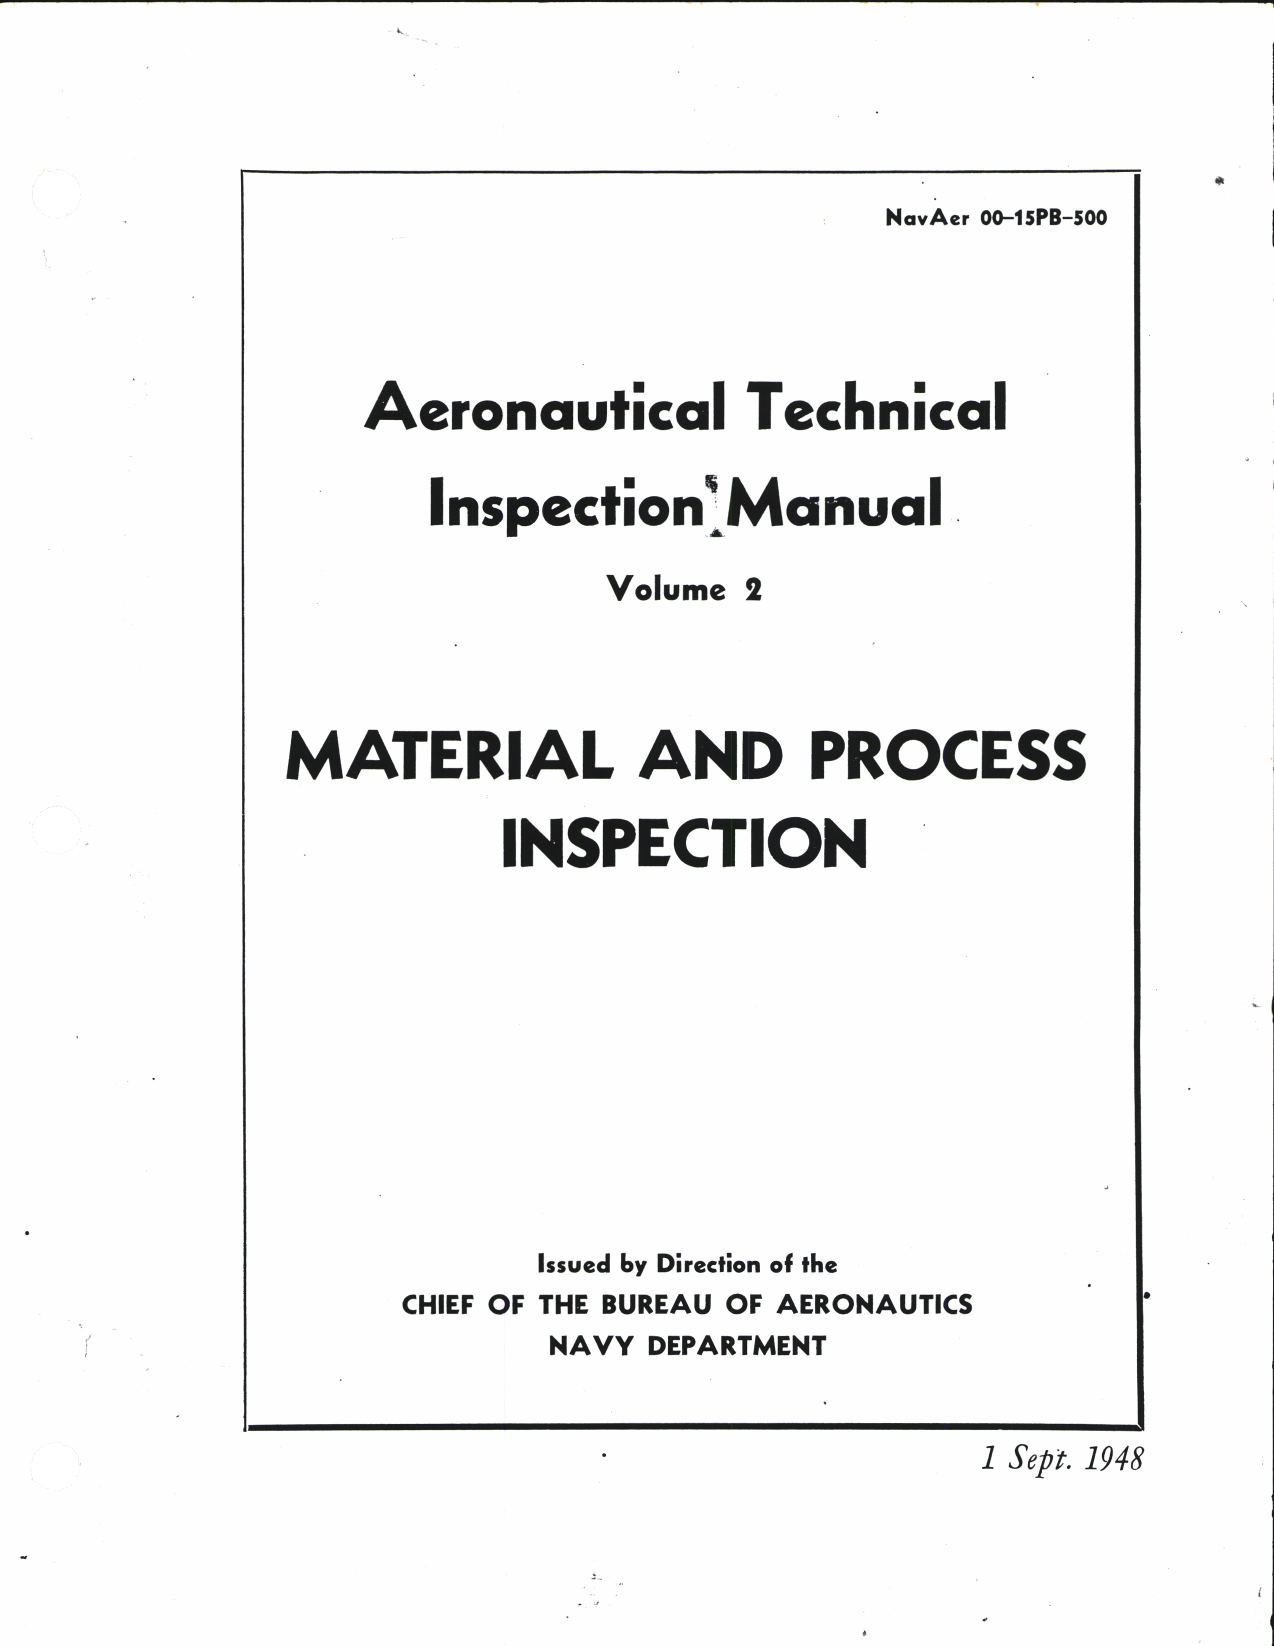 Sample page 1 from AirCorps Library document: Aeronautical Technical Inspection Manual - Material and Process Inspection